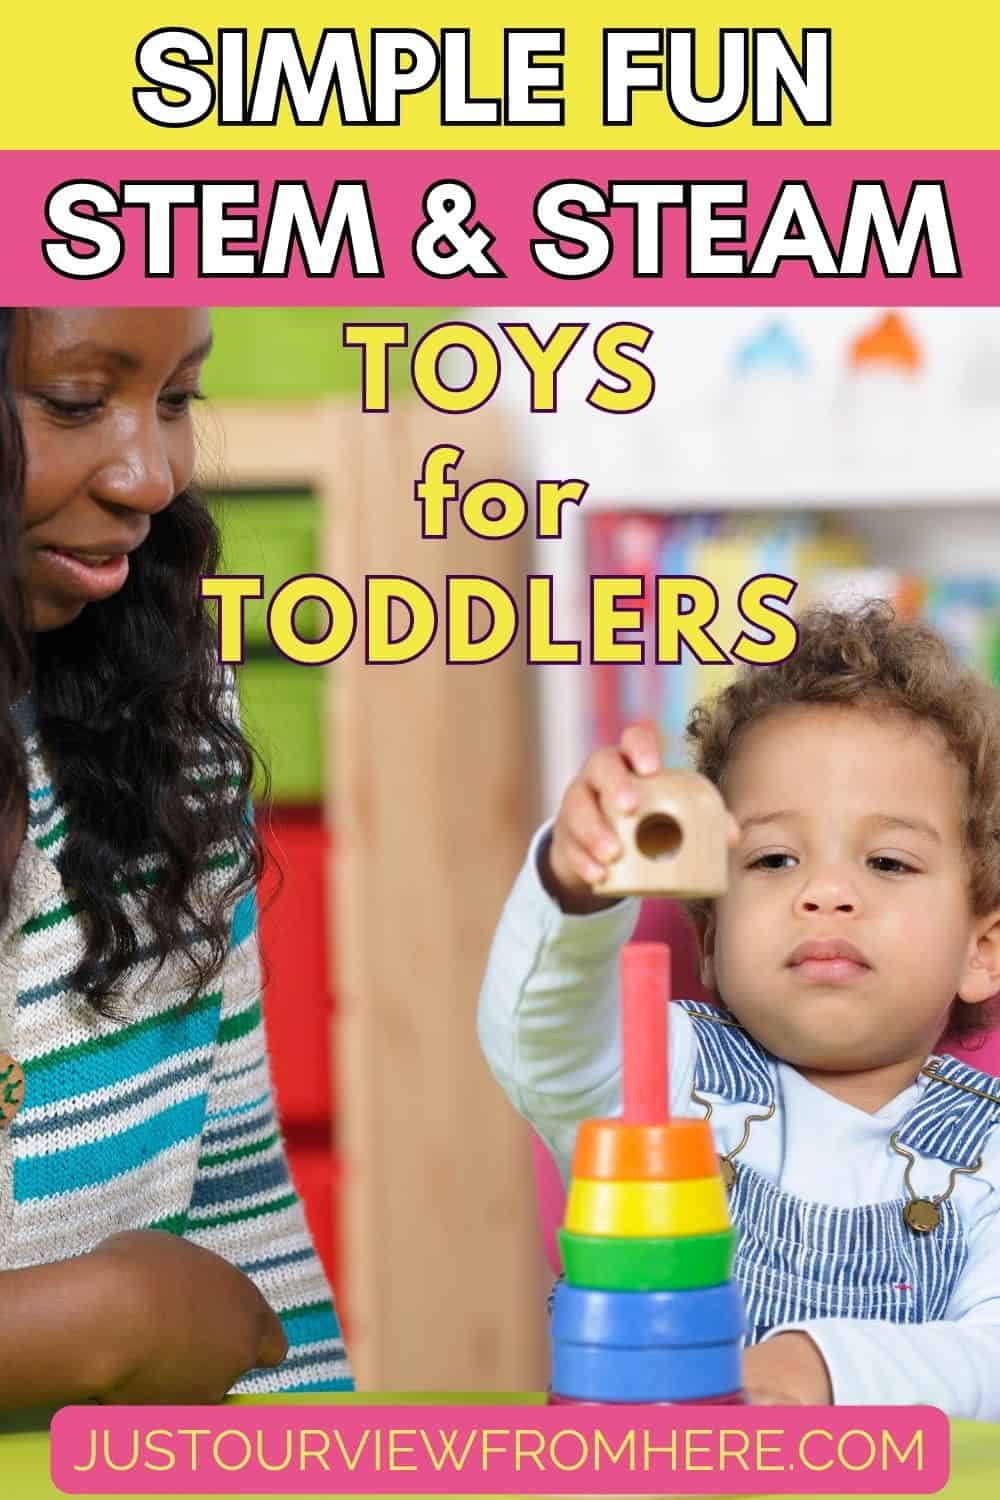 MOM AND TODDLER SON PLAYING WITH A STACKING TOY, TEXT OVERLAY SIMPLE FUN STEM AND STEAM TOYS FOR TODDLERS